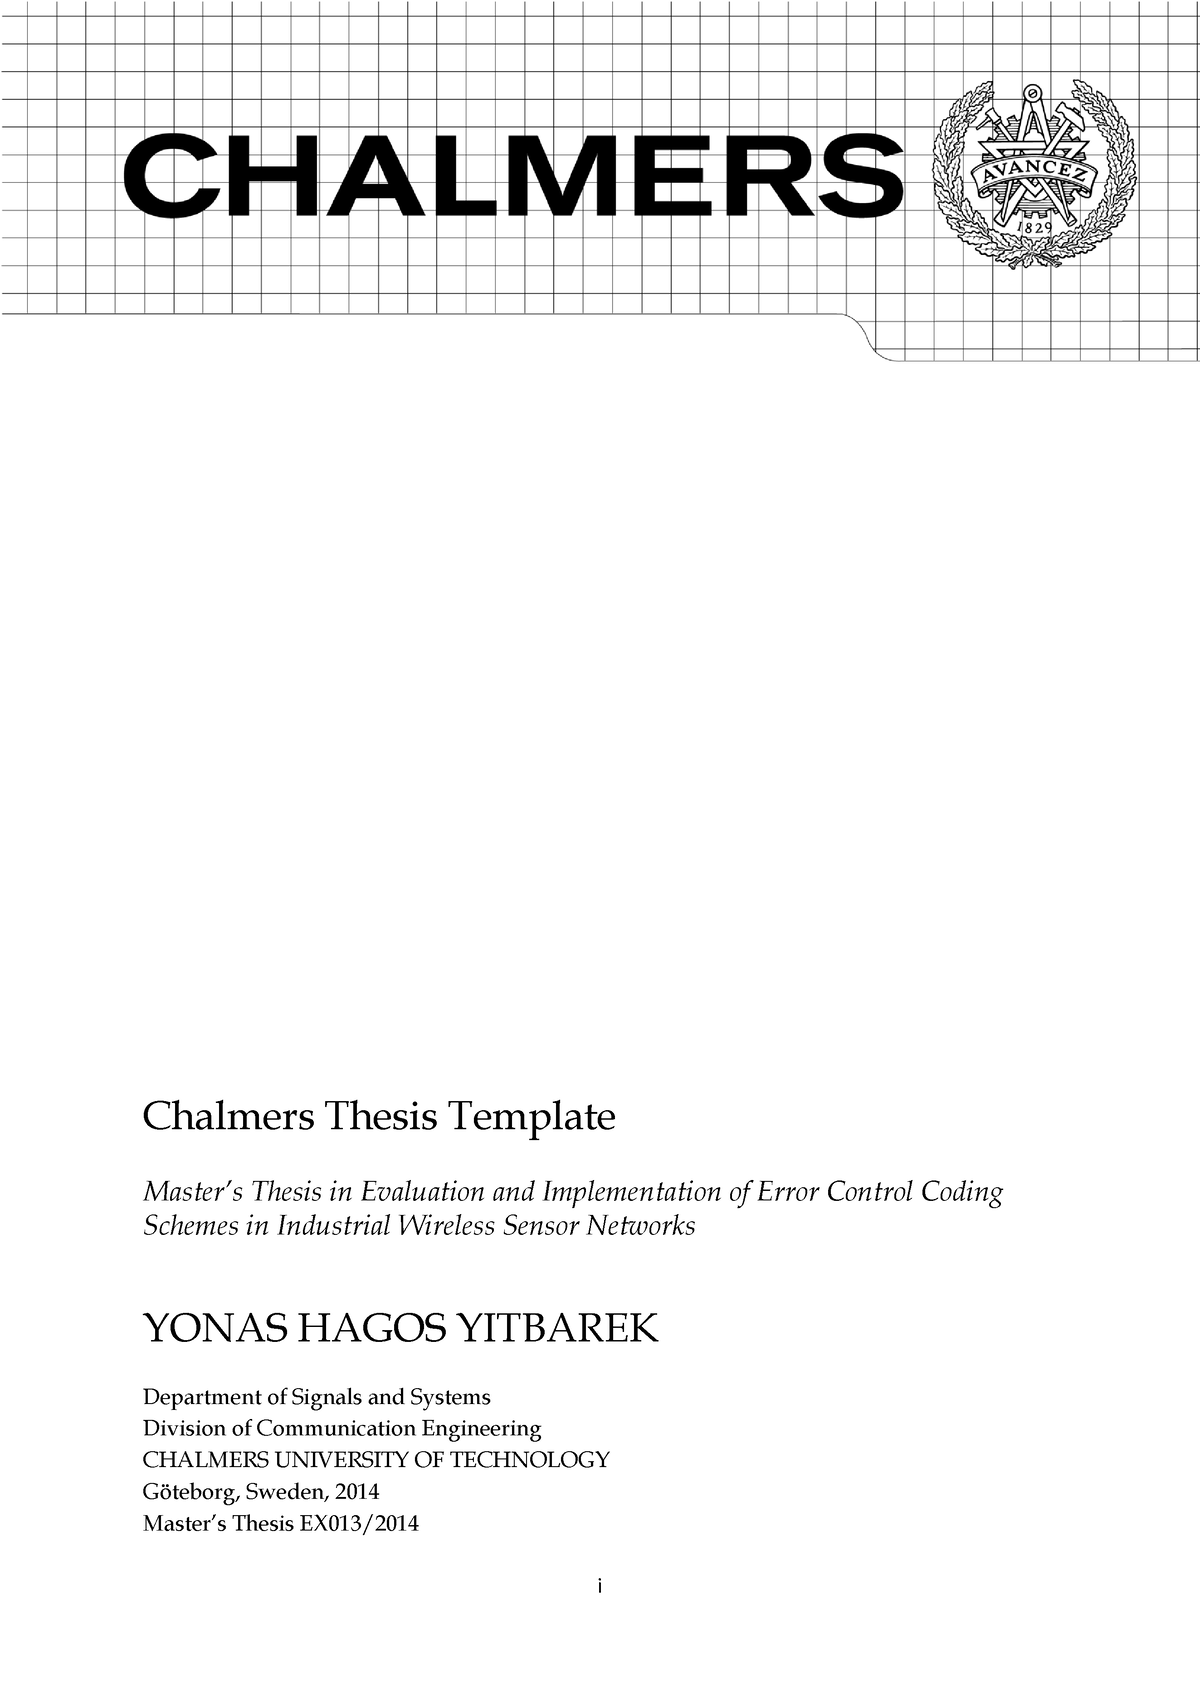 chalmers master thesis work card